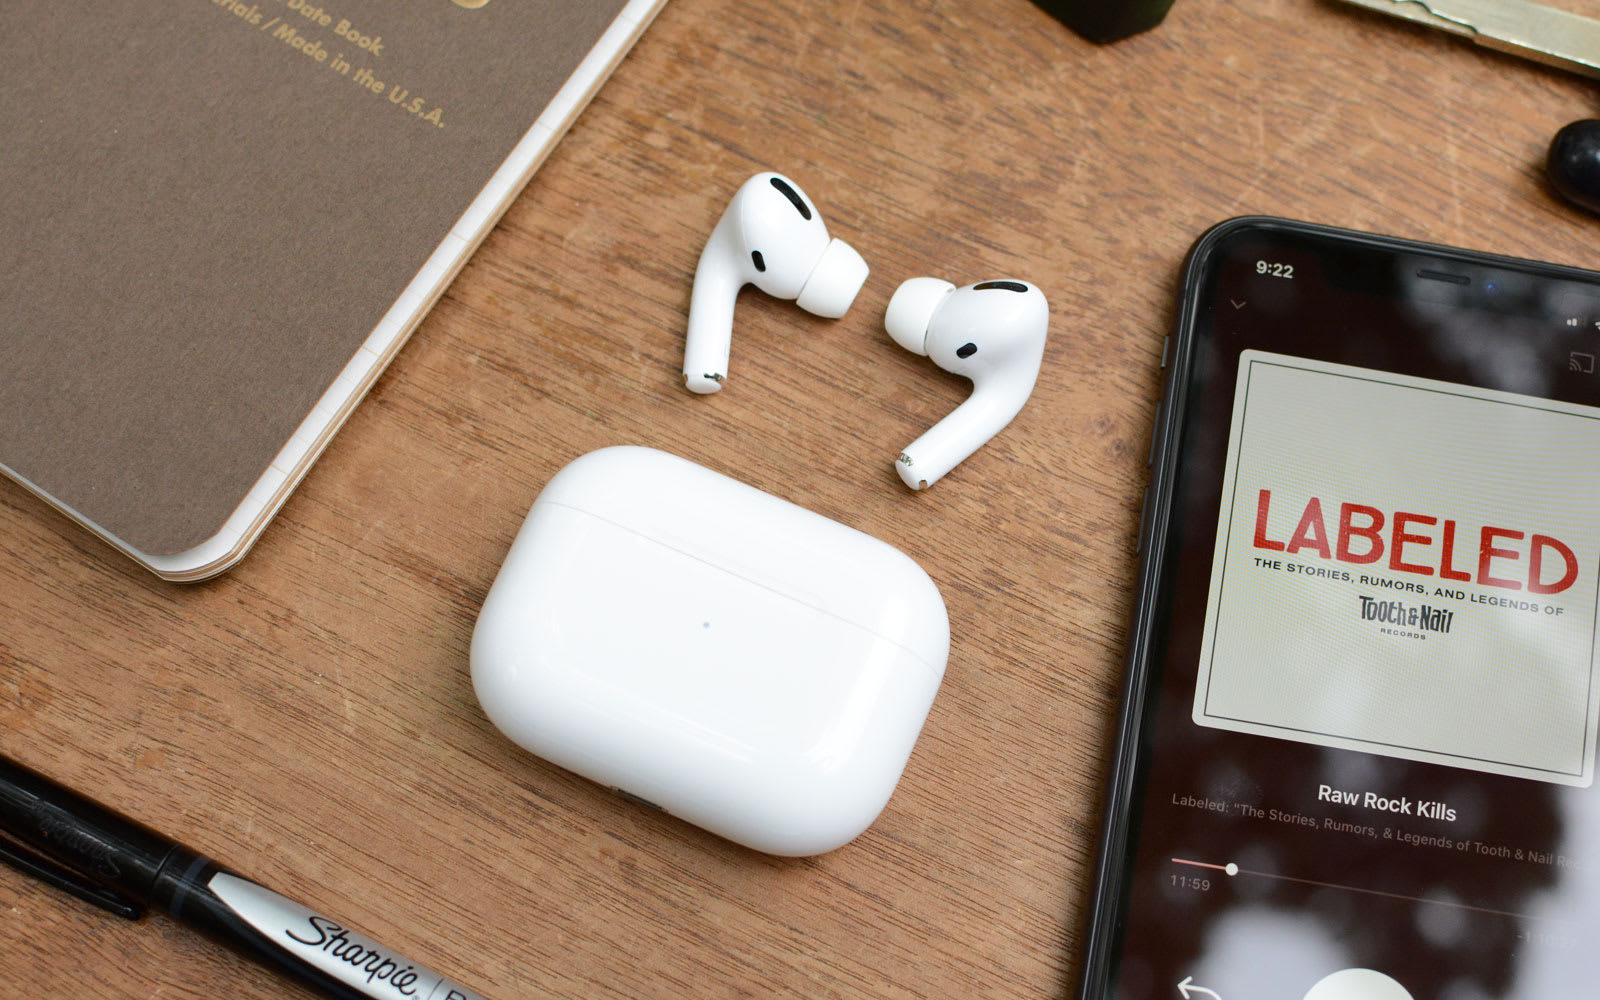 struik steno Gevlekt AirPods Pro review: Apple's latest earbuds can hang with the best | Engadget